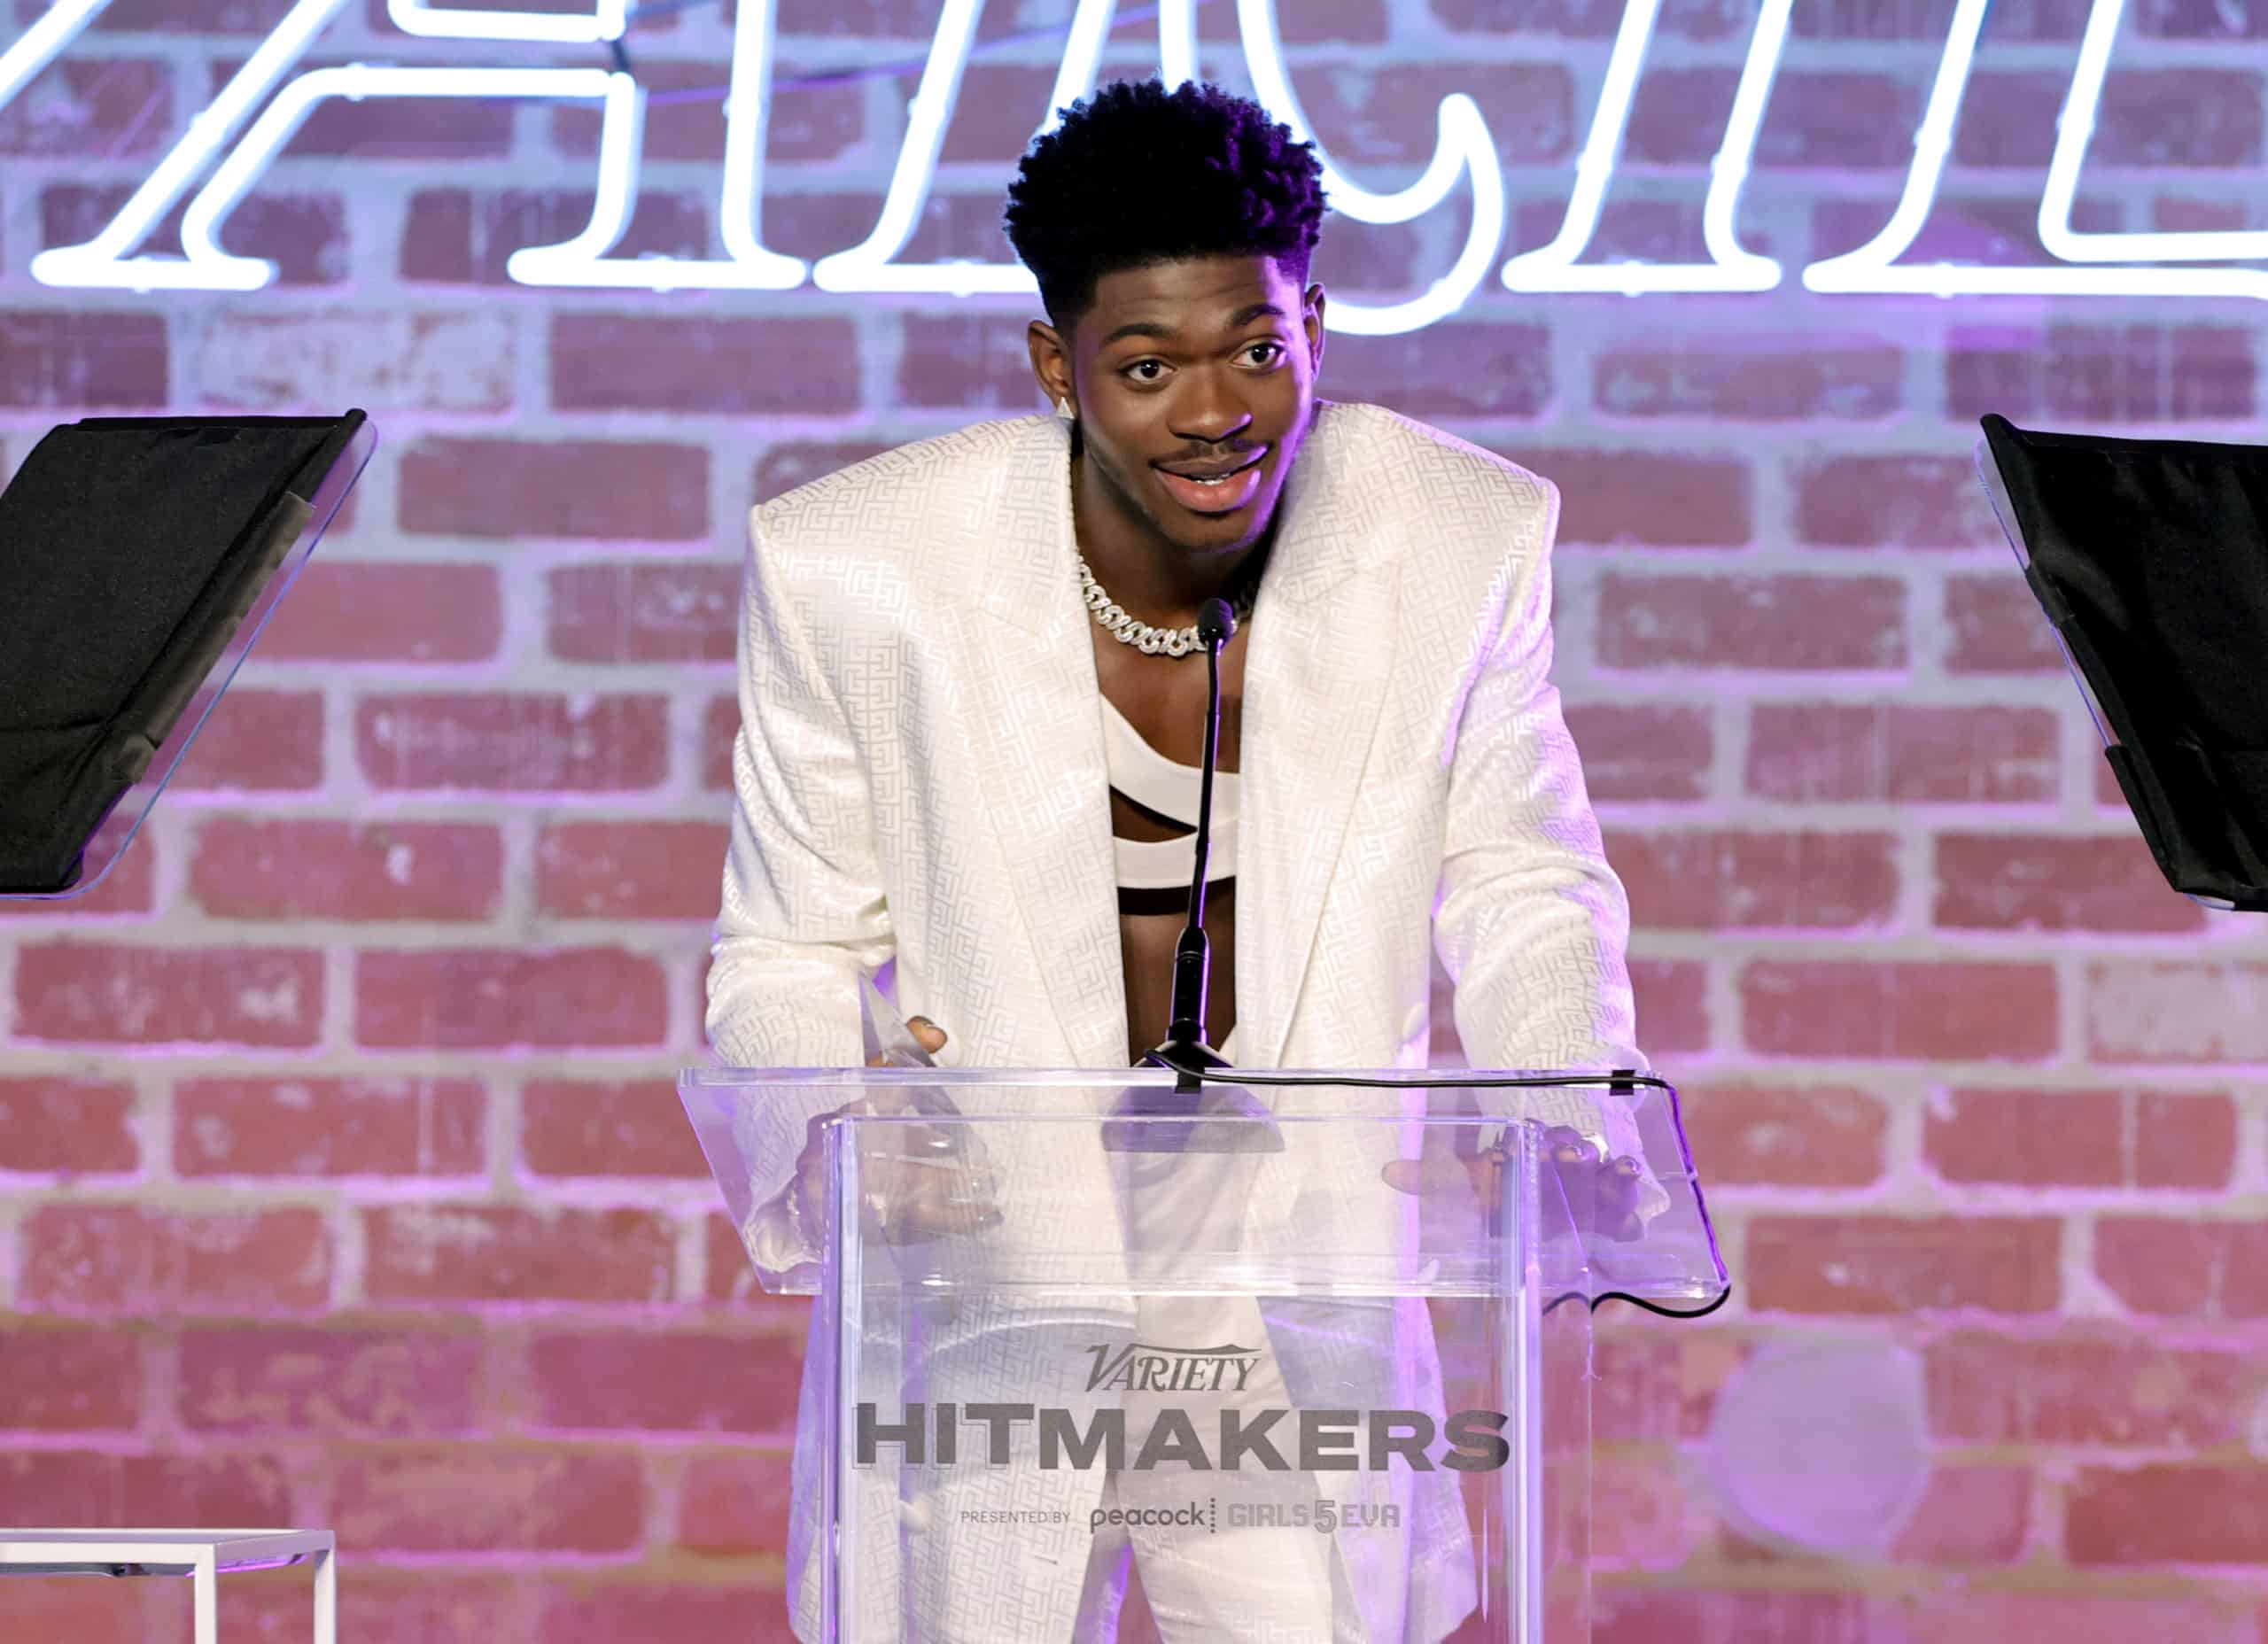 Lil Nas X Reveals He Has Covid-19 In Series Of Now Deleted Tweets